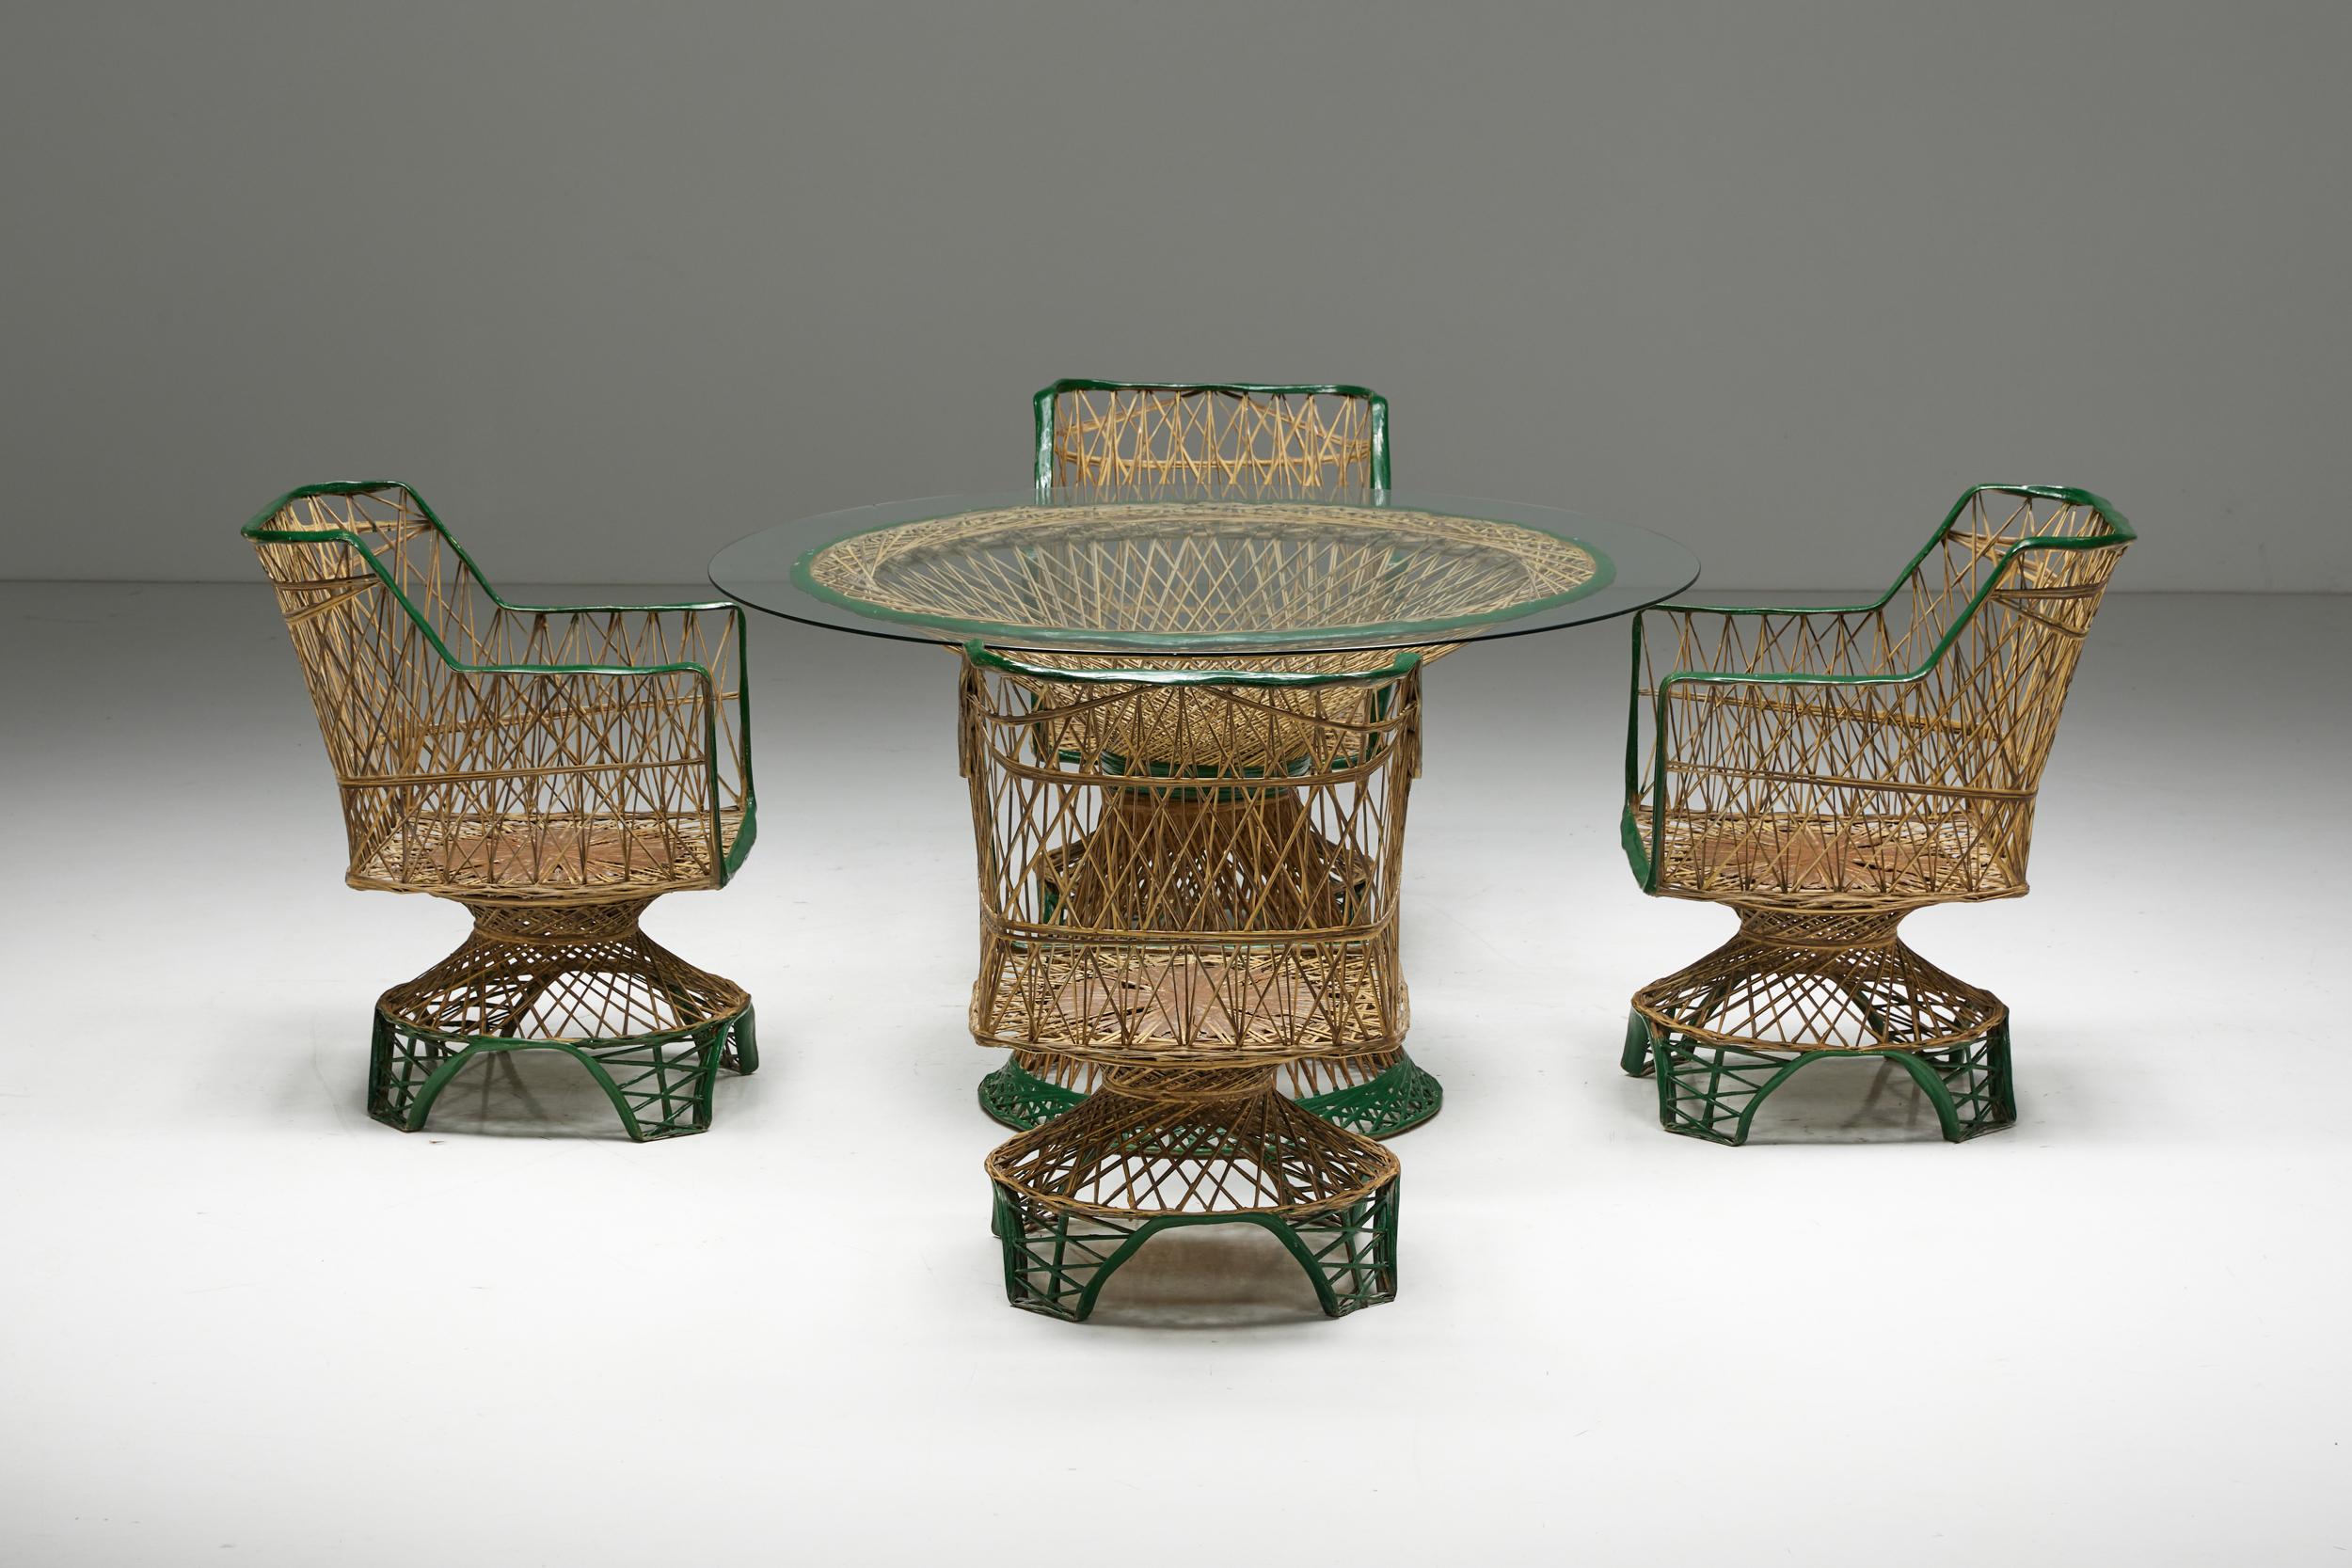 Italian Design; Eclectic Design; Italy; 1970s; Bamboo; Outdoor Furniture; Patio Dining Set; Bonacina;

Italian rare dining set from the 1970s, carefully crafted to capture the essence of Italian craftsmanship in an eclectic interior or outdoor